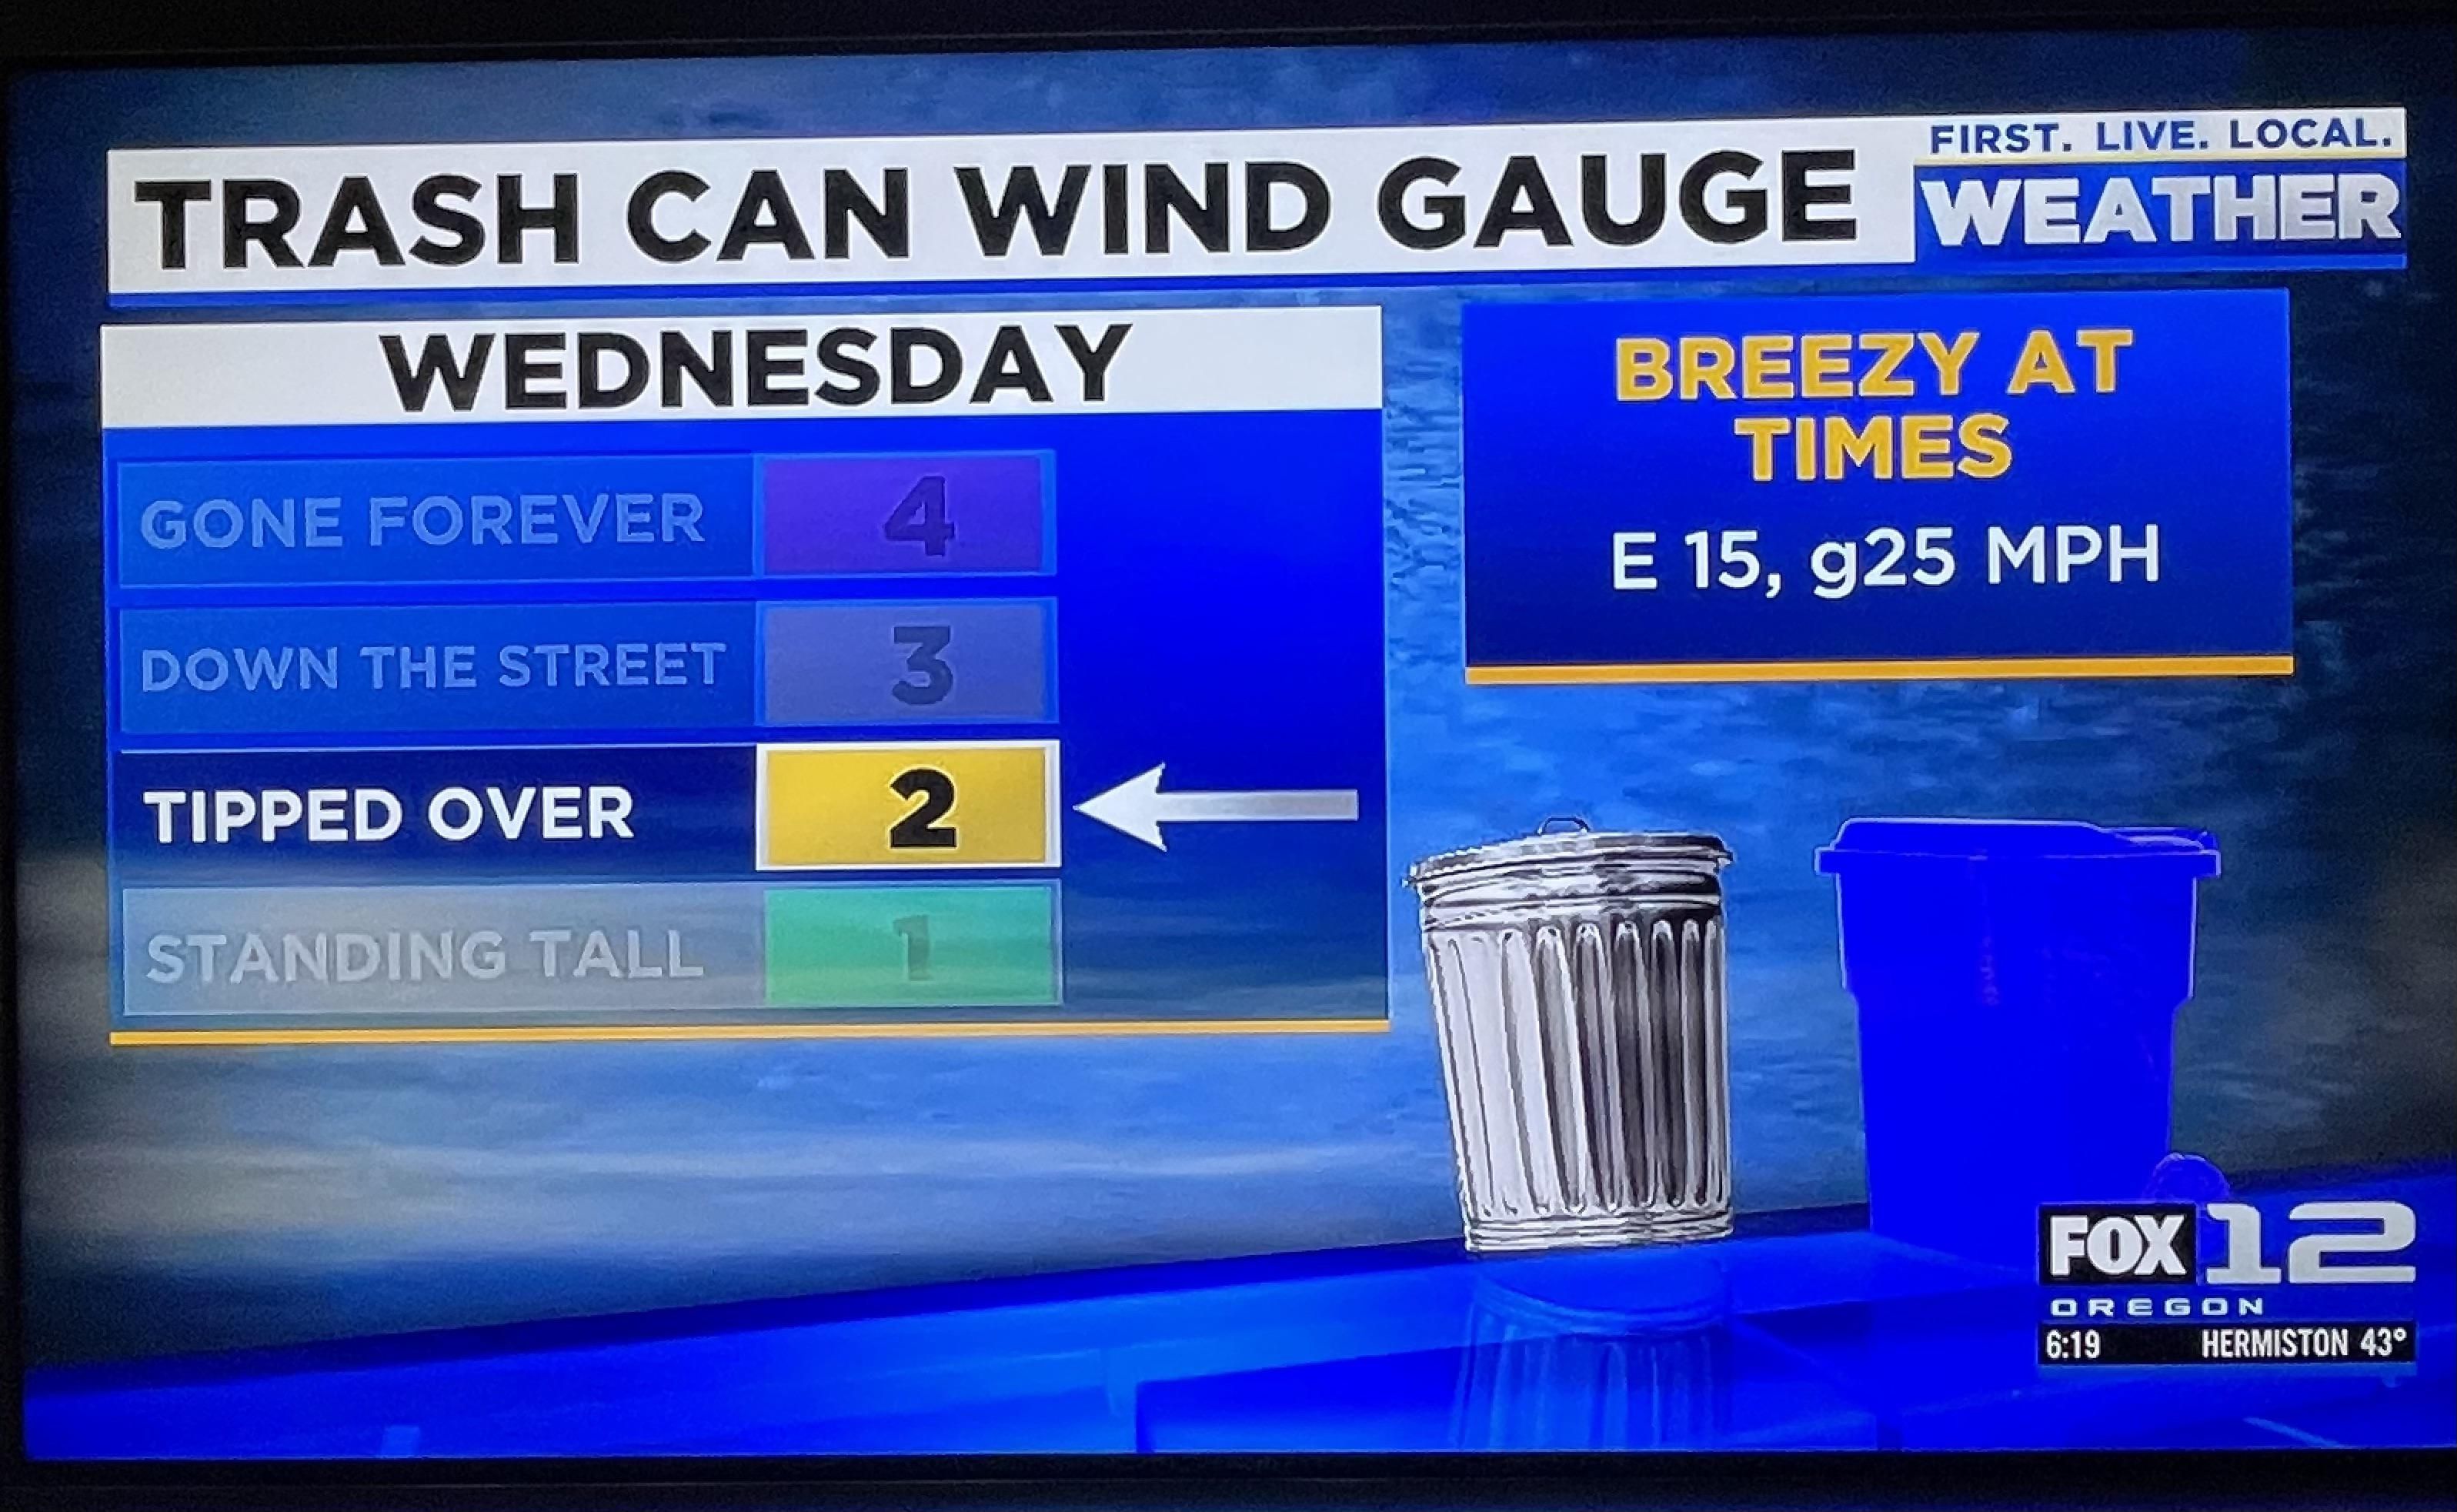 Local weather wind gauge. “Gone Forever” is pretty brisk.